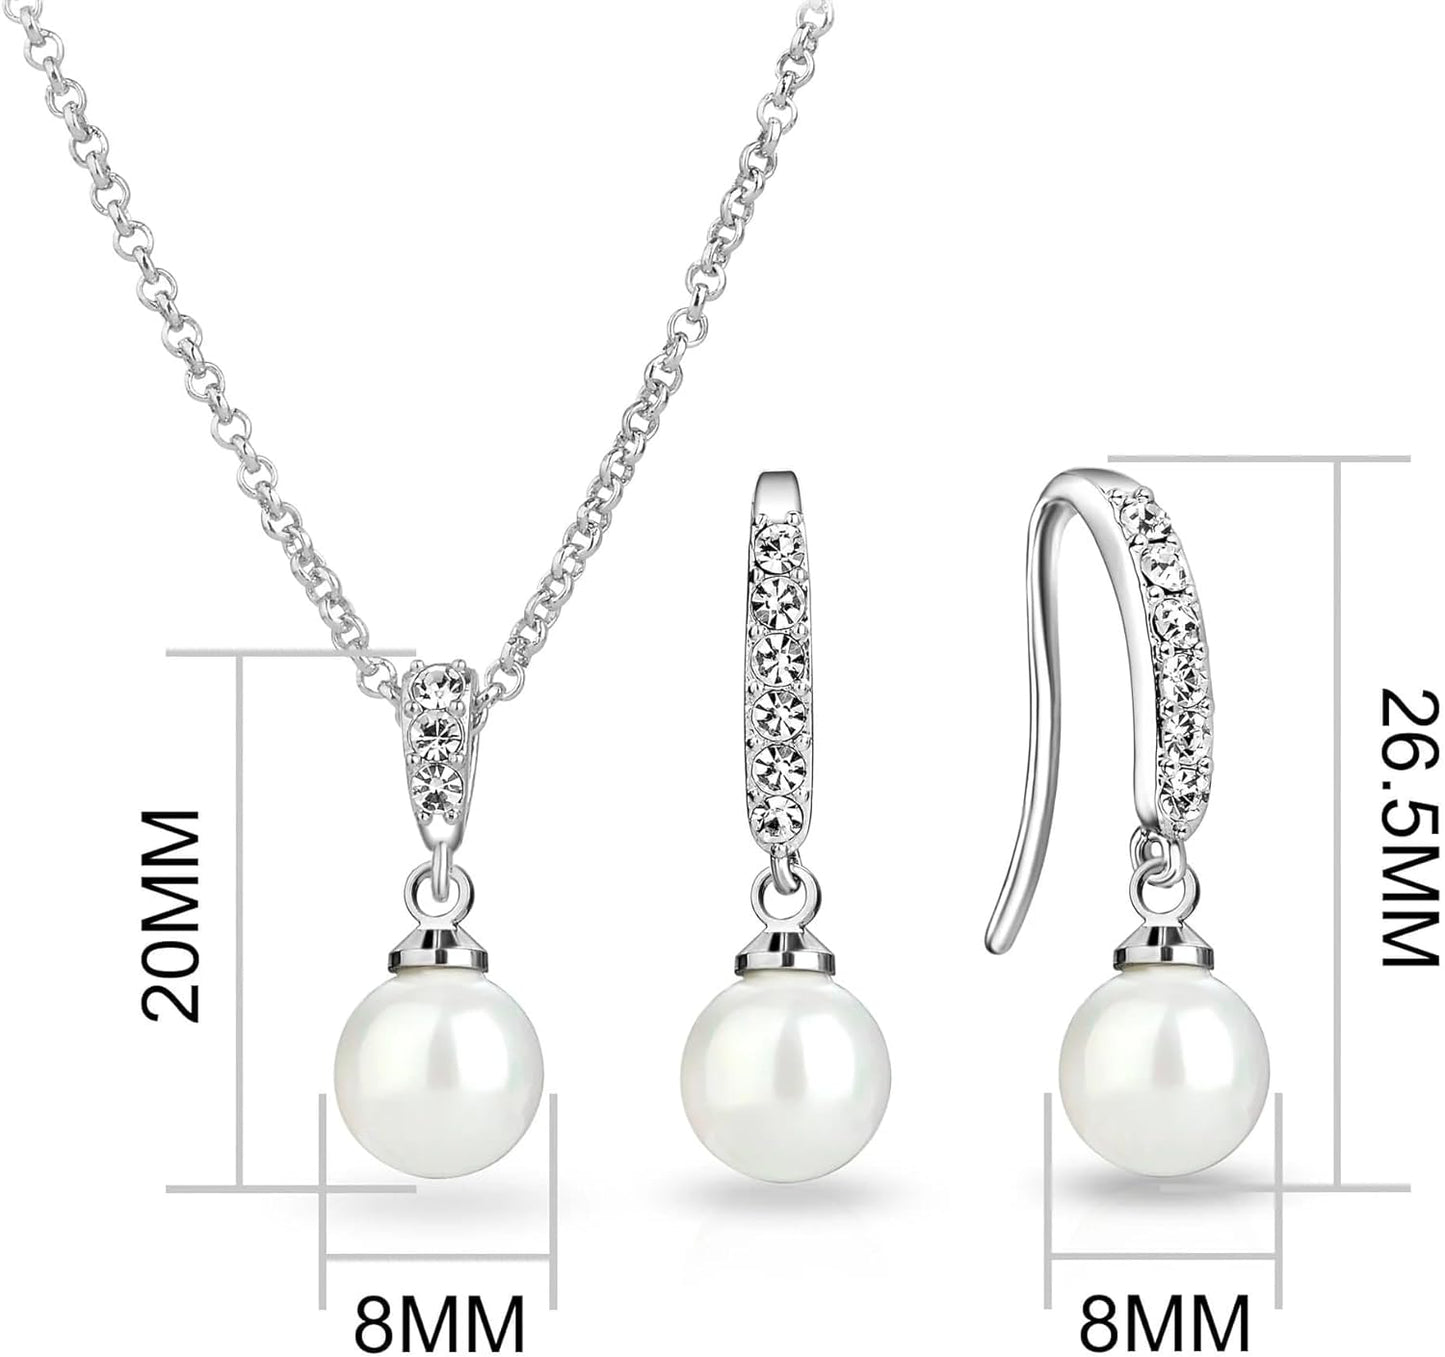 Silver Plated Pearl Drop Set Created with Zircondia® Crystals